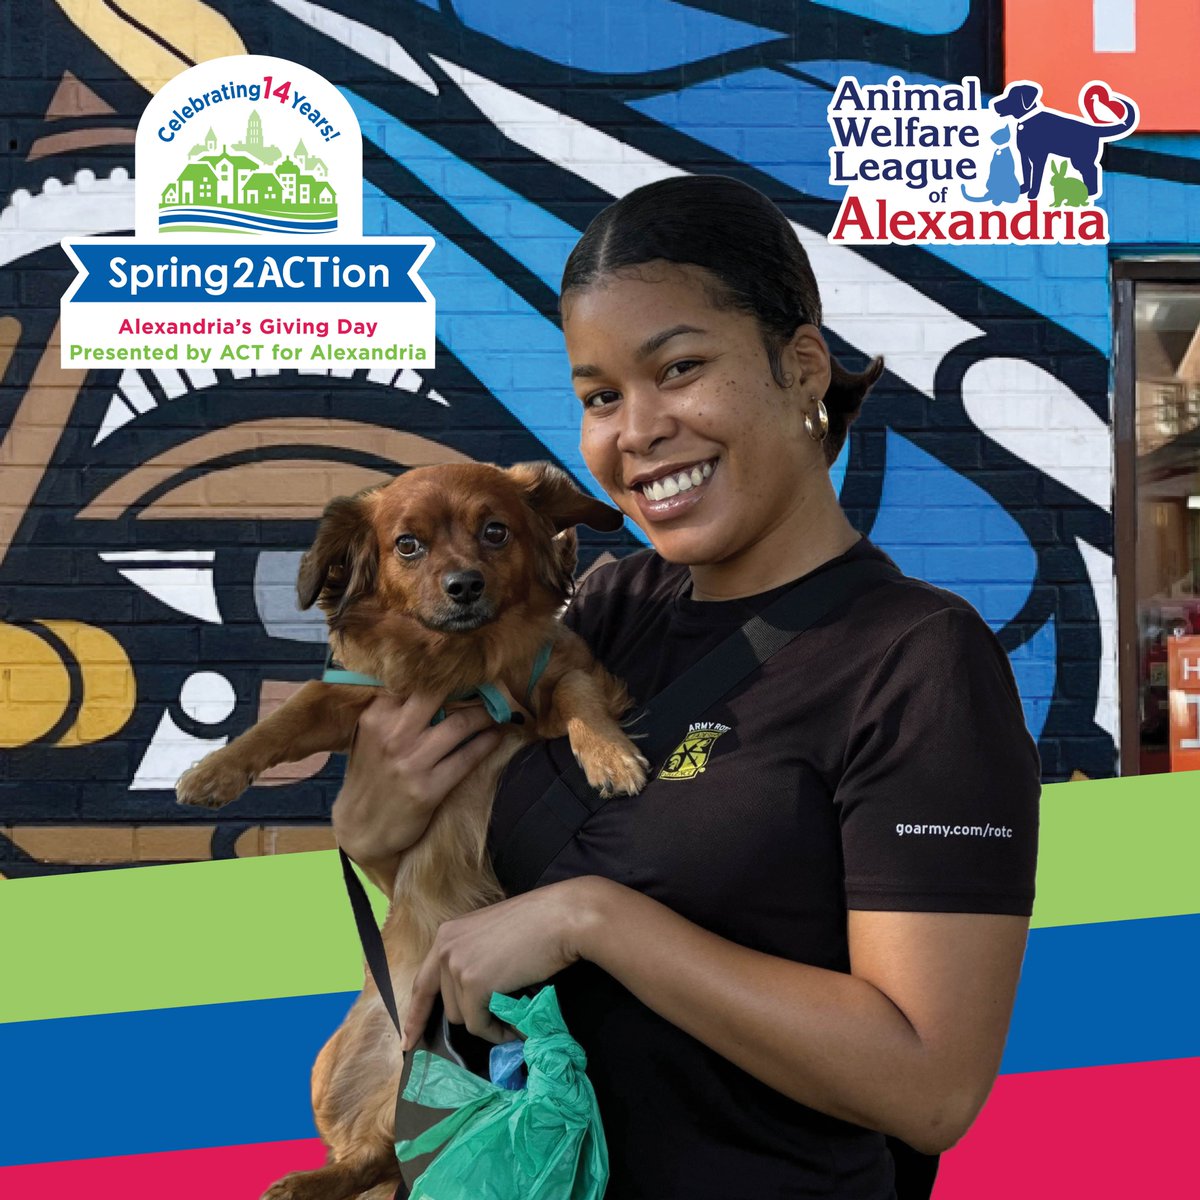 It’s #Spring2ACTion! Make a gift to benefit animals and families in our community. Along with caring for thousands of animals each year, we have many programs that keep animals right where they belong ... with the families who love them. 💙spring2action.org/organizations/…